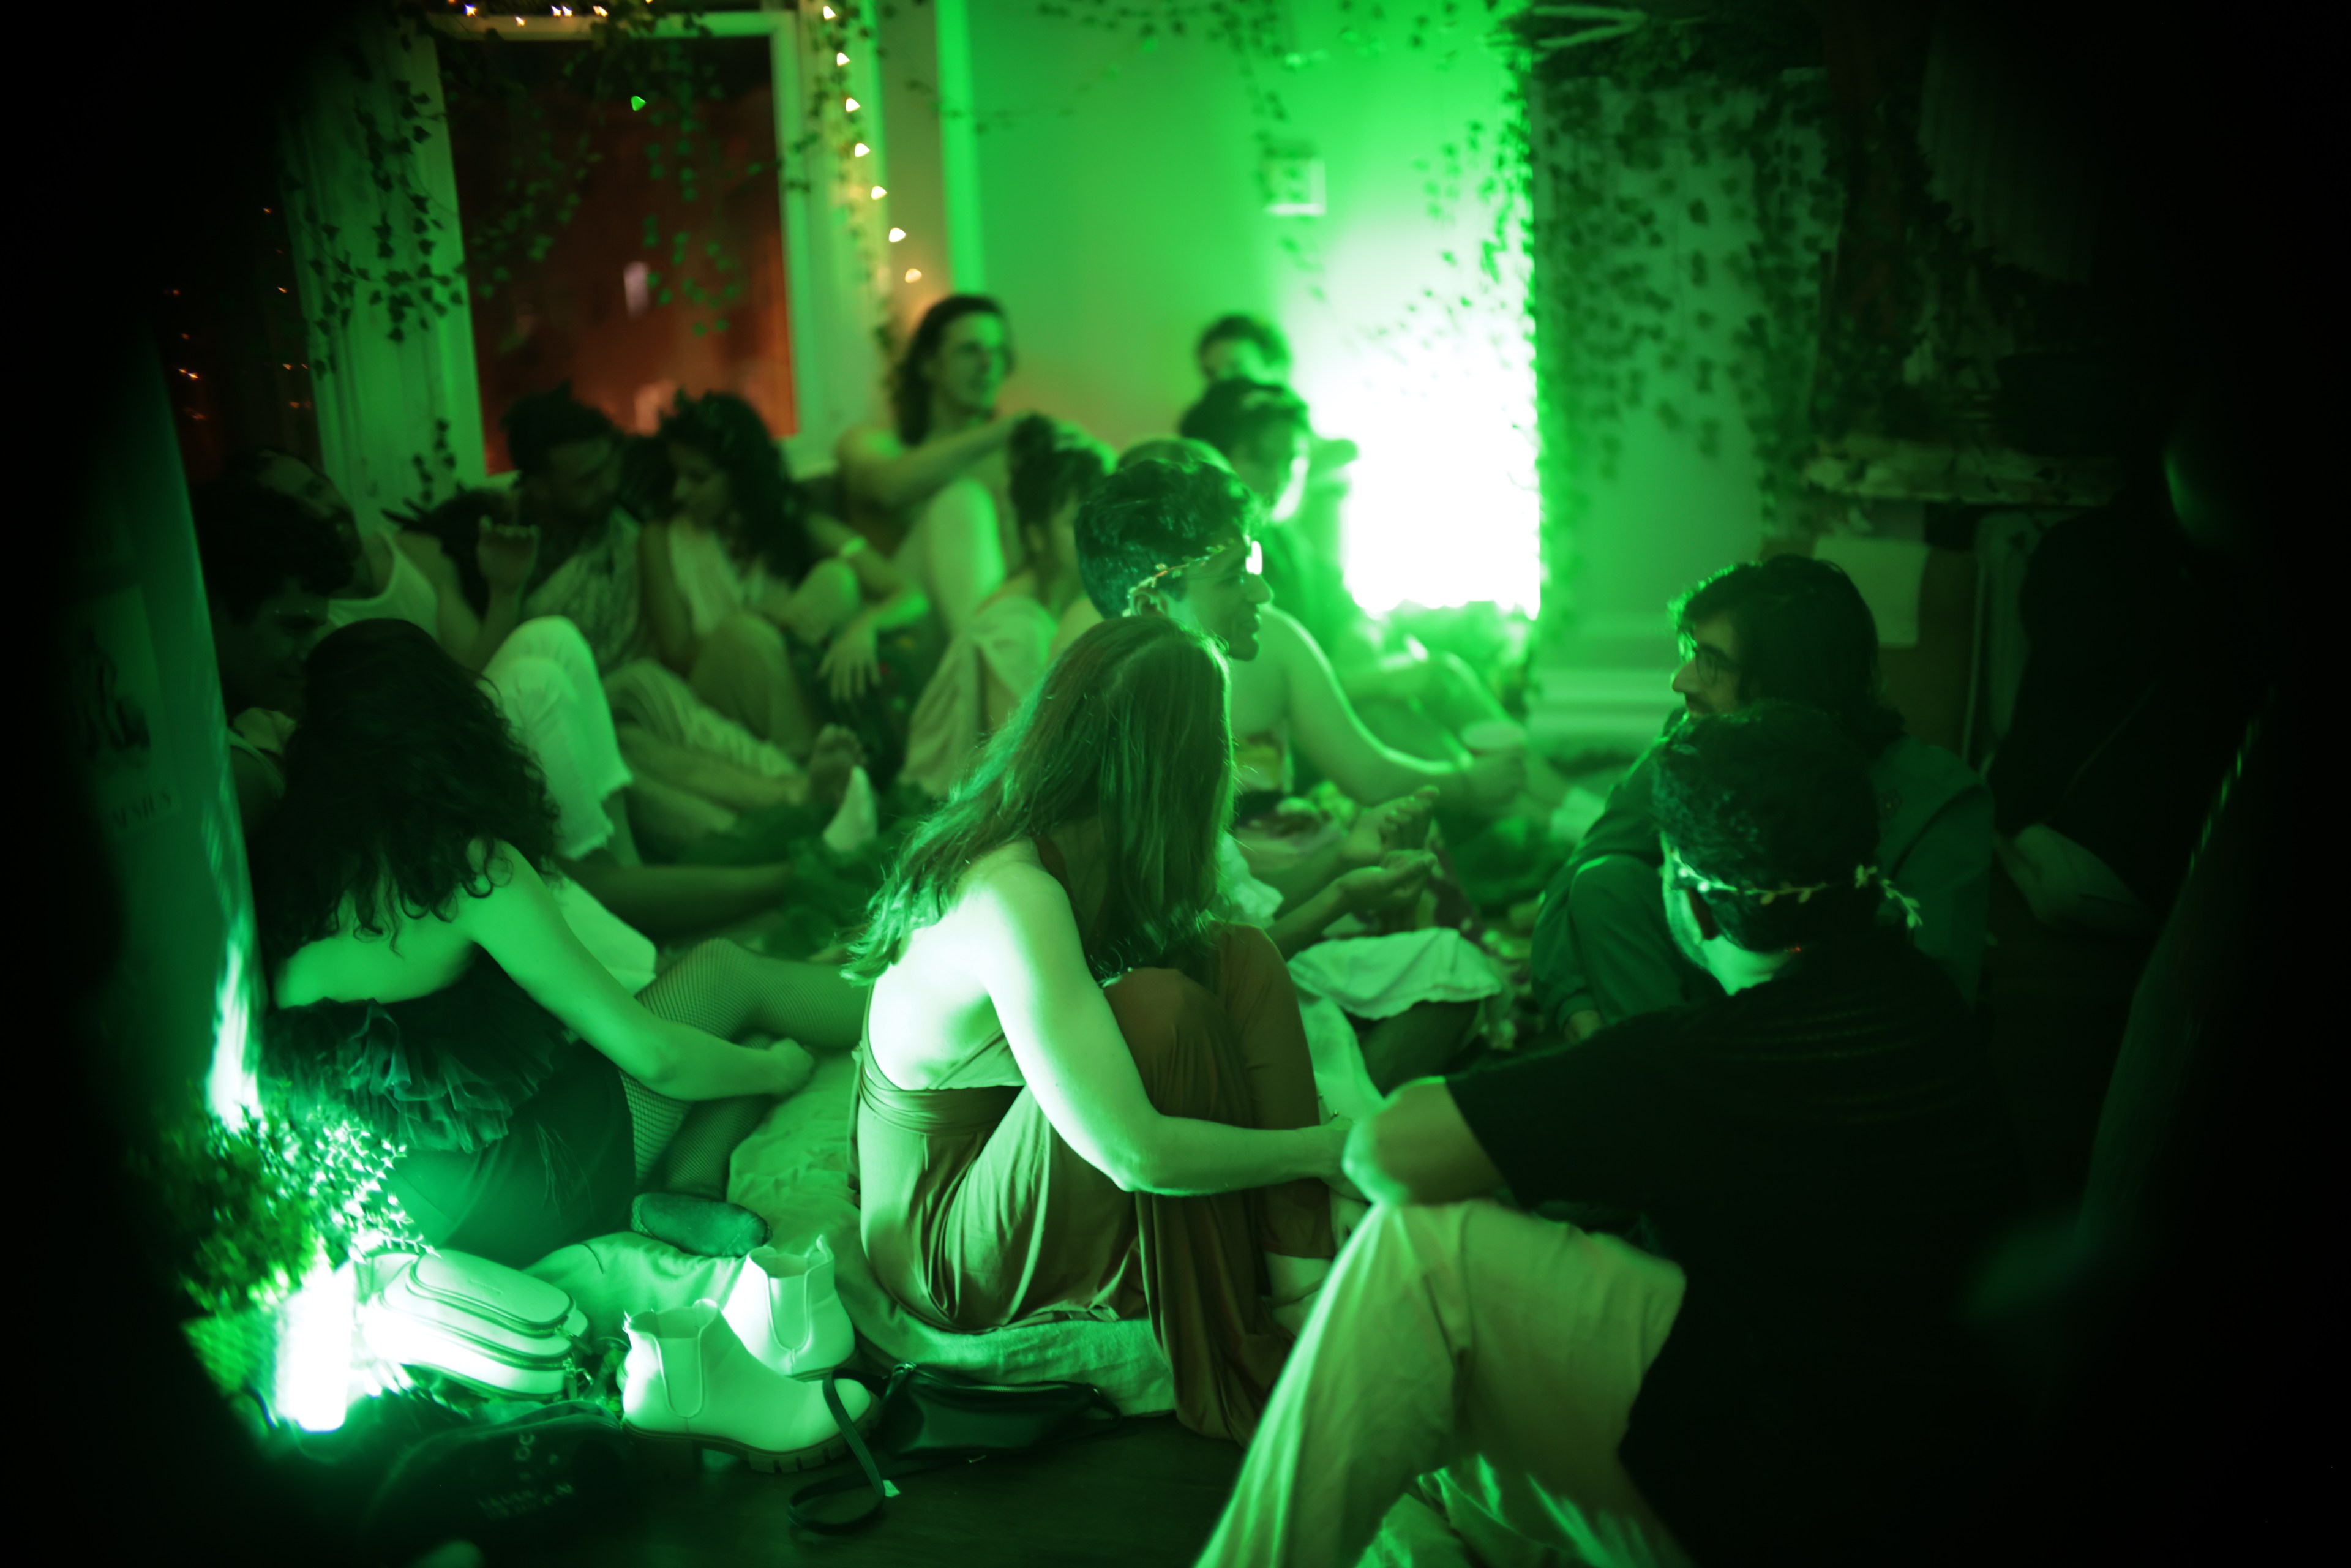 A group of people sit on the floor in a room with green lighting and fairy lights, chatting and relaxing.